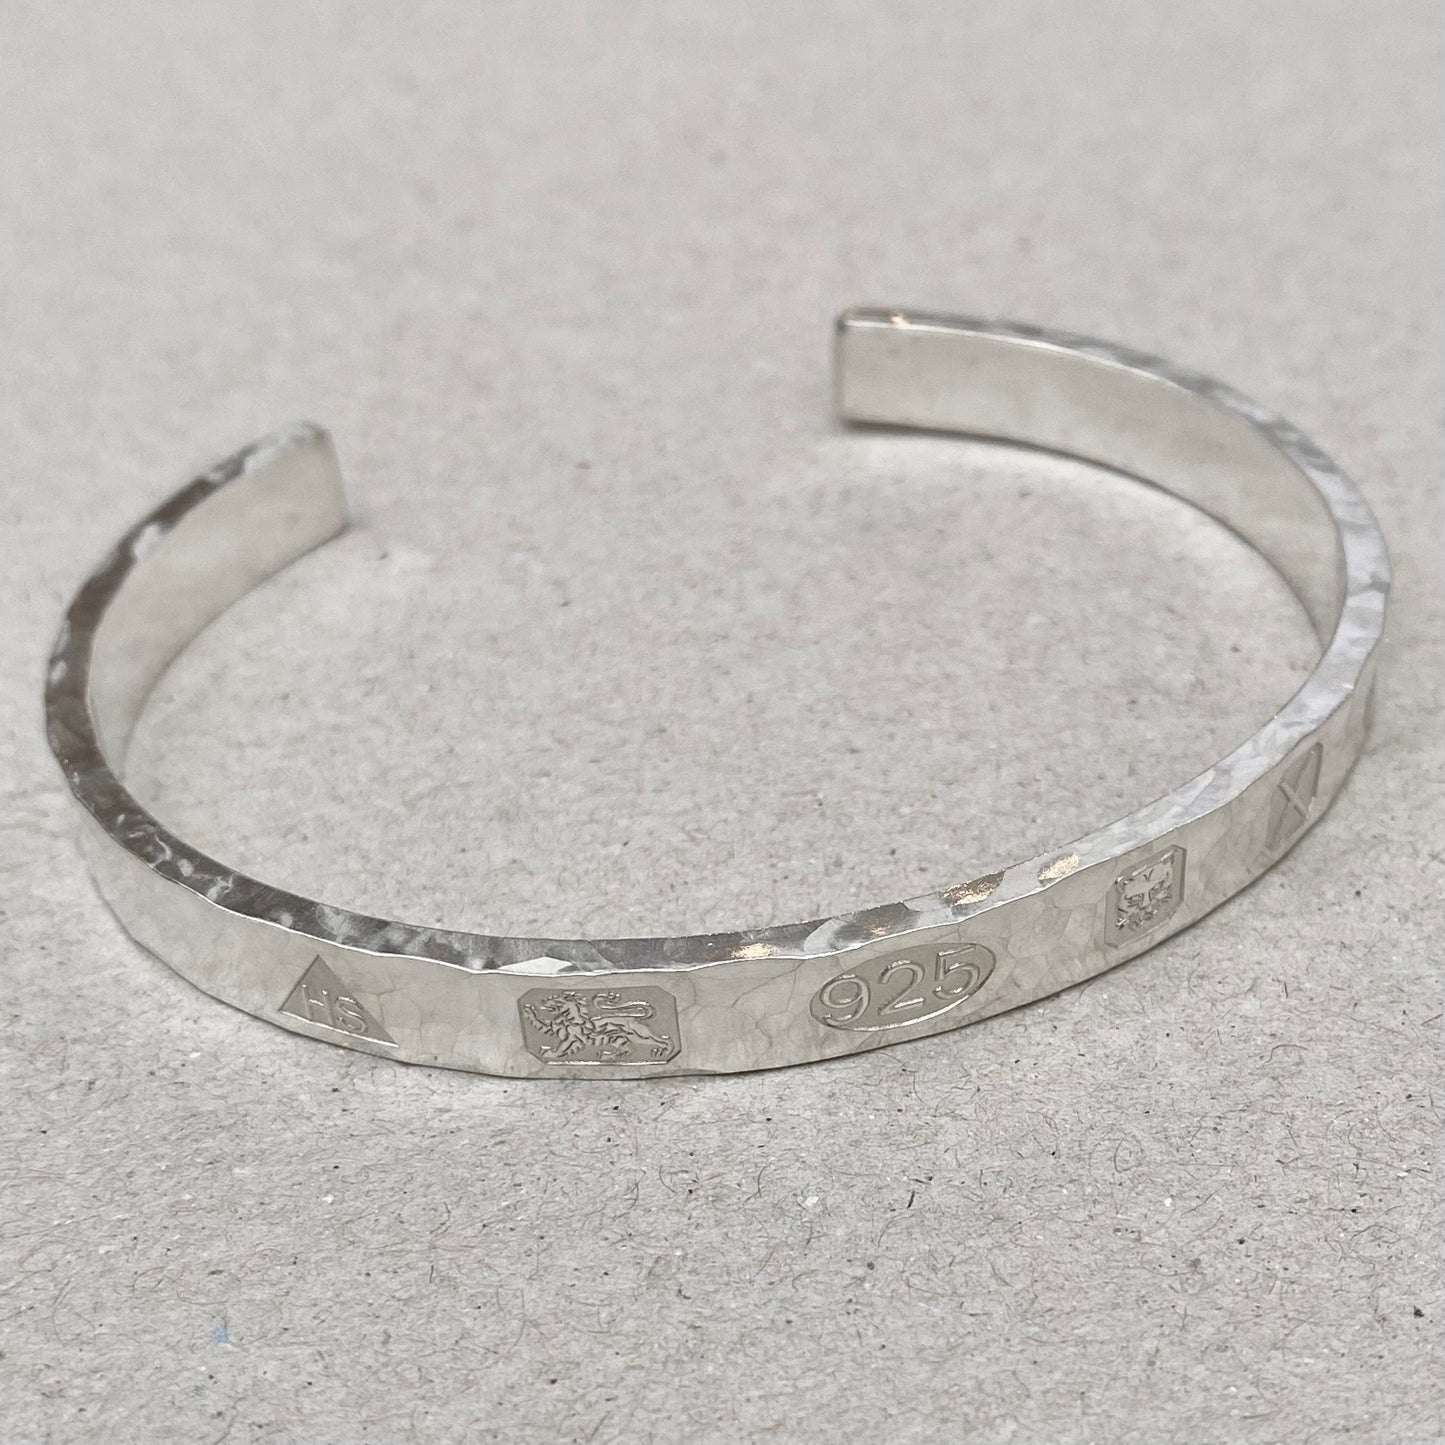 Handmade silver hammered finish hallmarked cuff bangle - Sizes 5mm, 7mm and 10mm wide - 2023 hallmark with the kings limited addition stamp